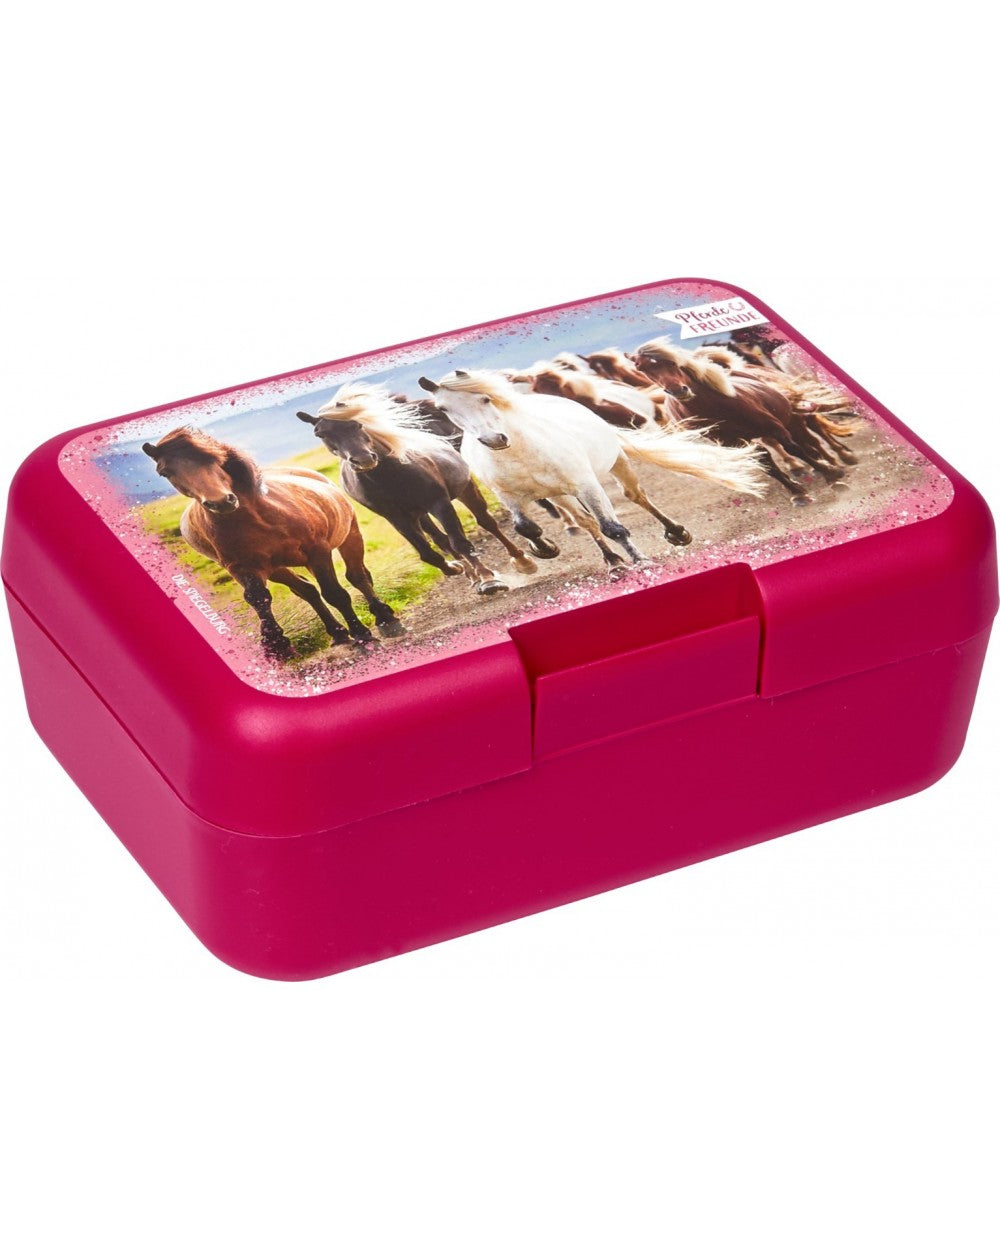 Horse lunch box | pink wild horses